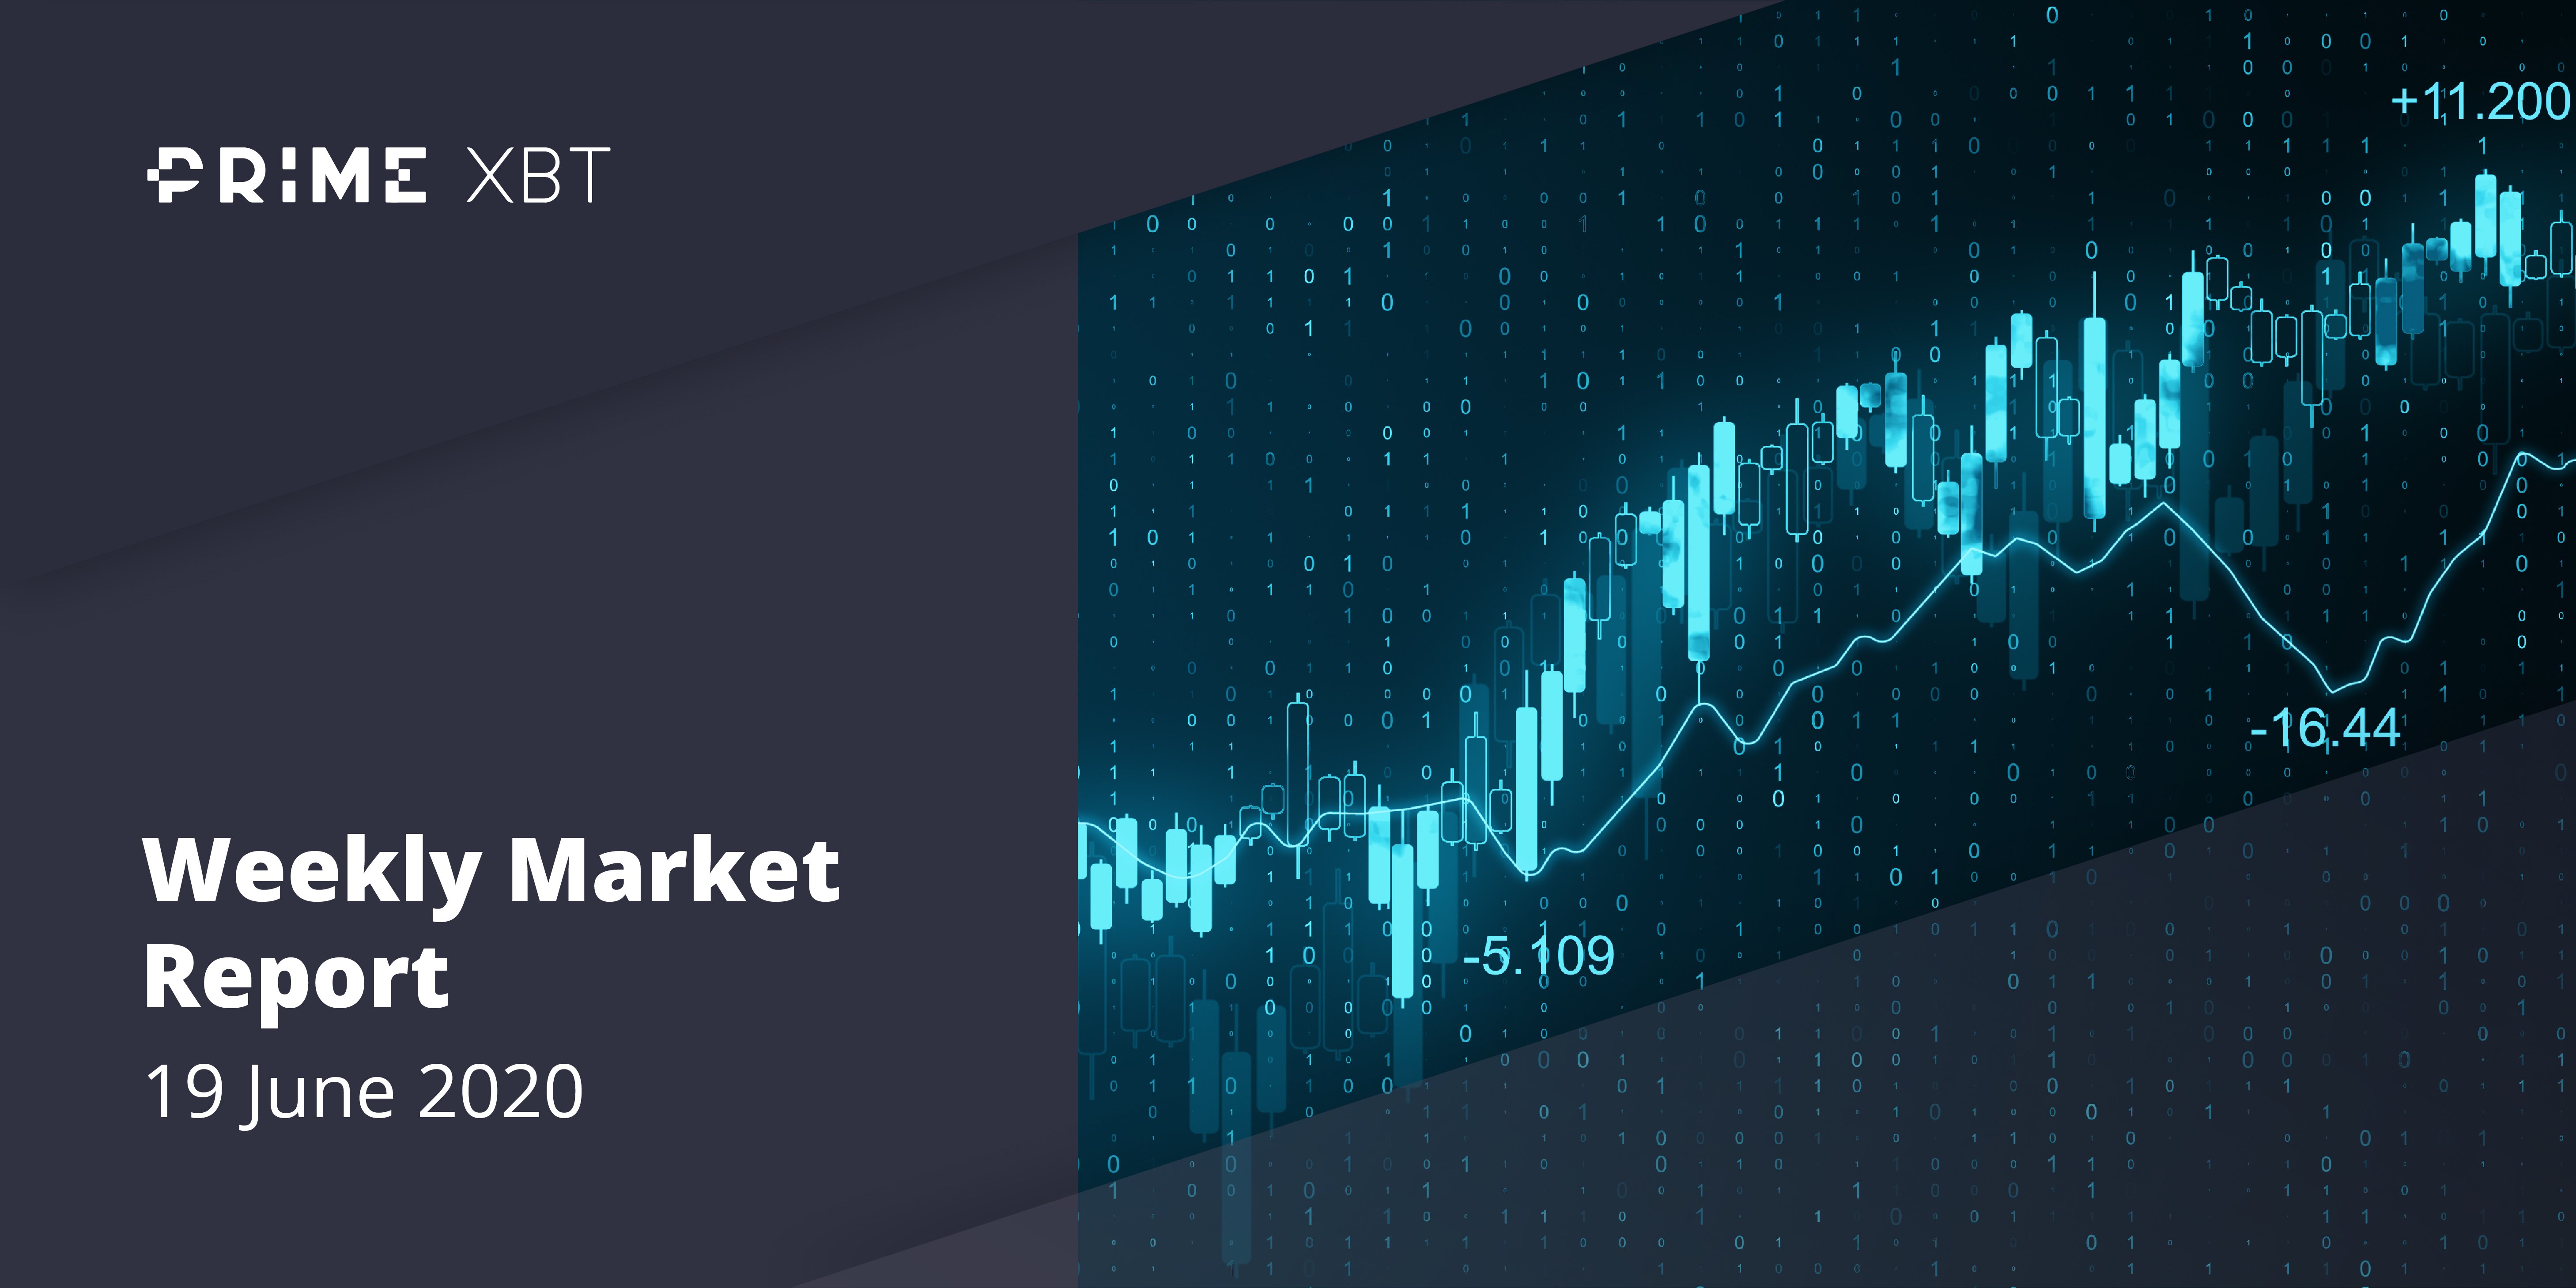 Crypto Market Report: Bitcoin Recovers From Midweek Dip to Trade Mostly Sideways While Small Cap Coins Continue Successful Month’s Growth - 19.06.20